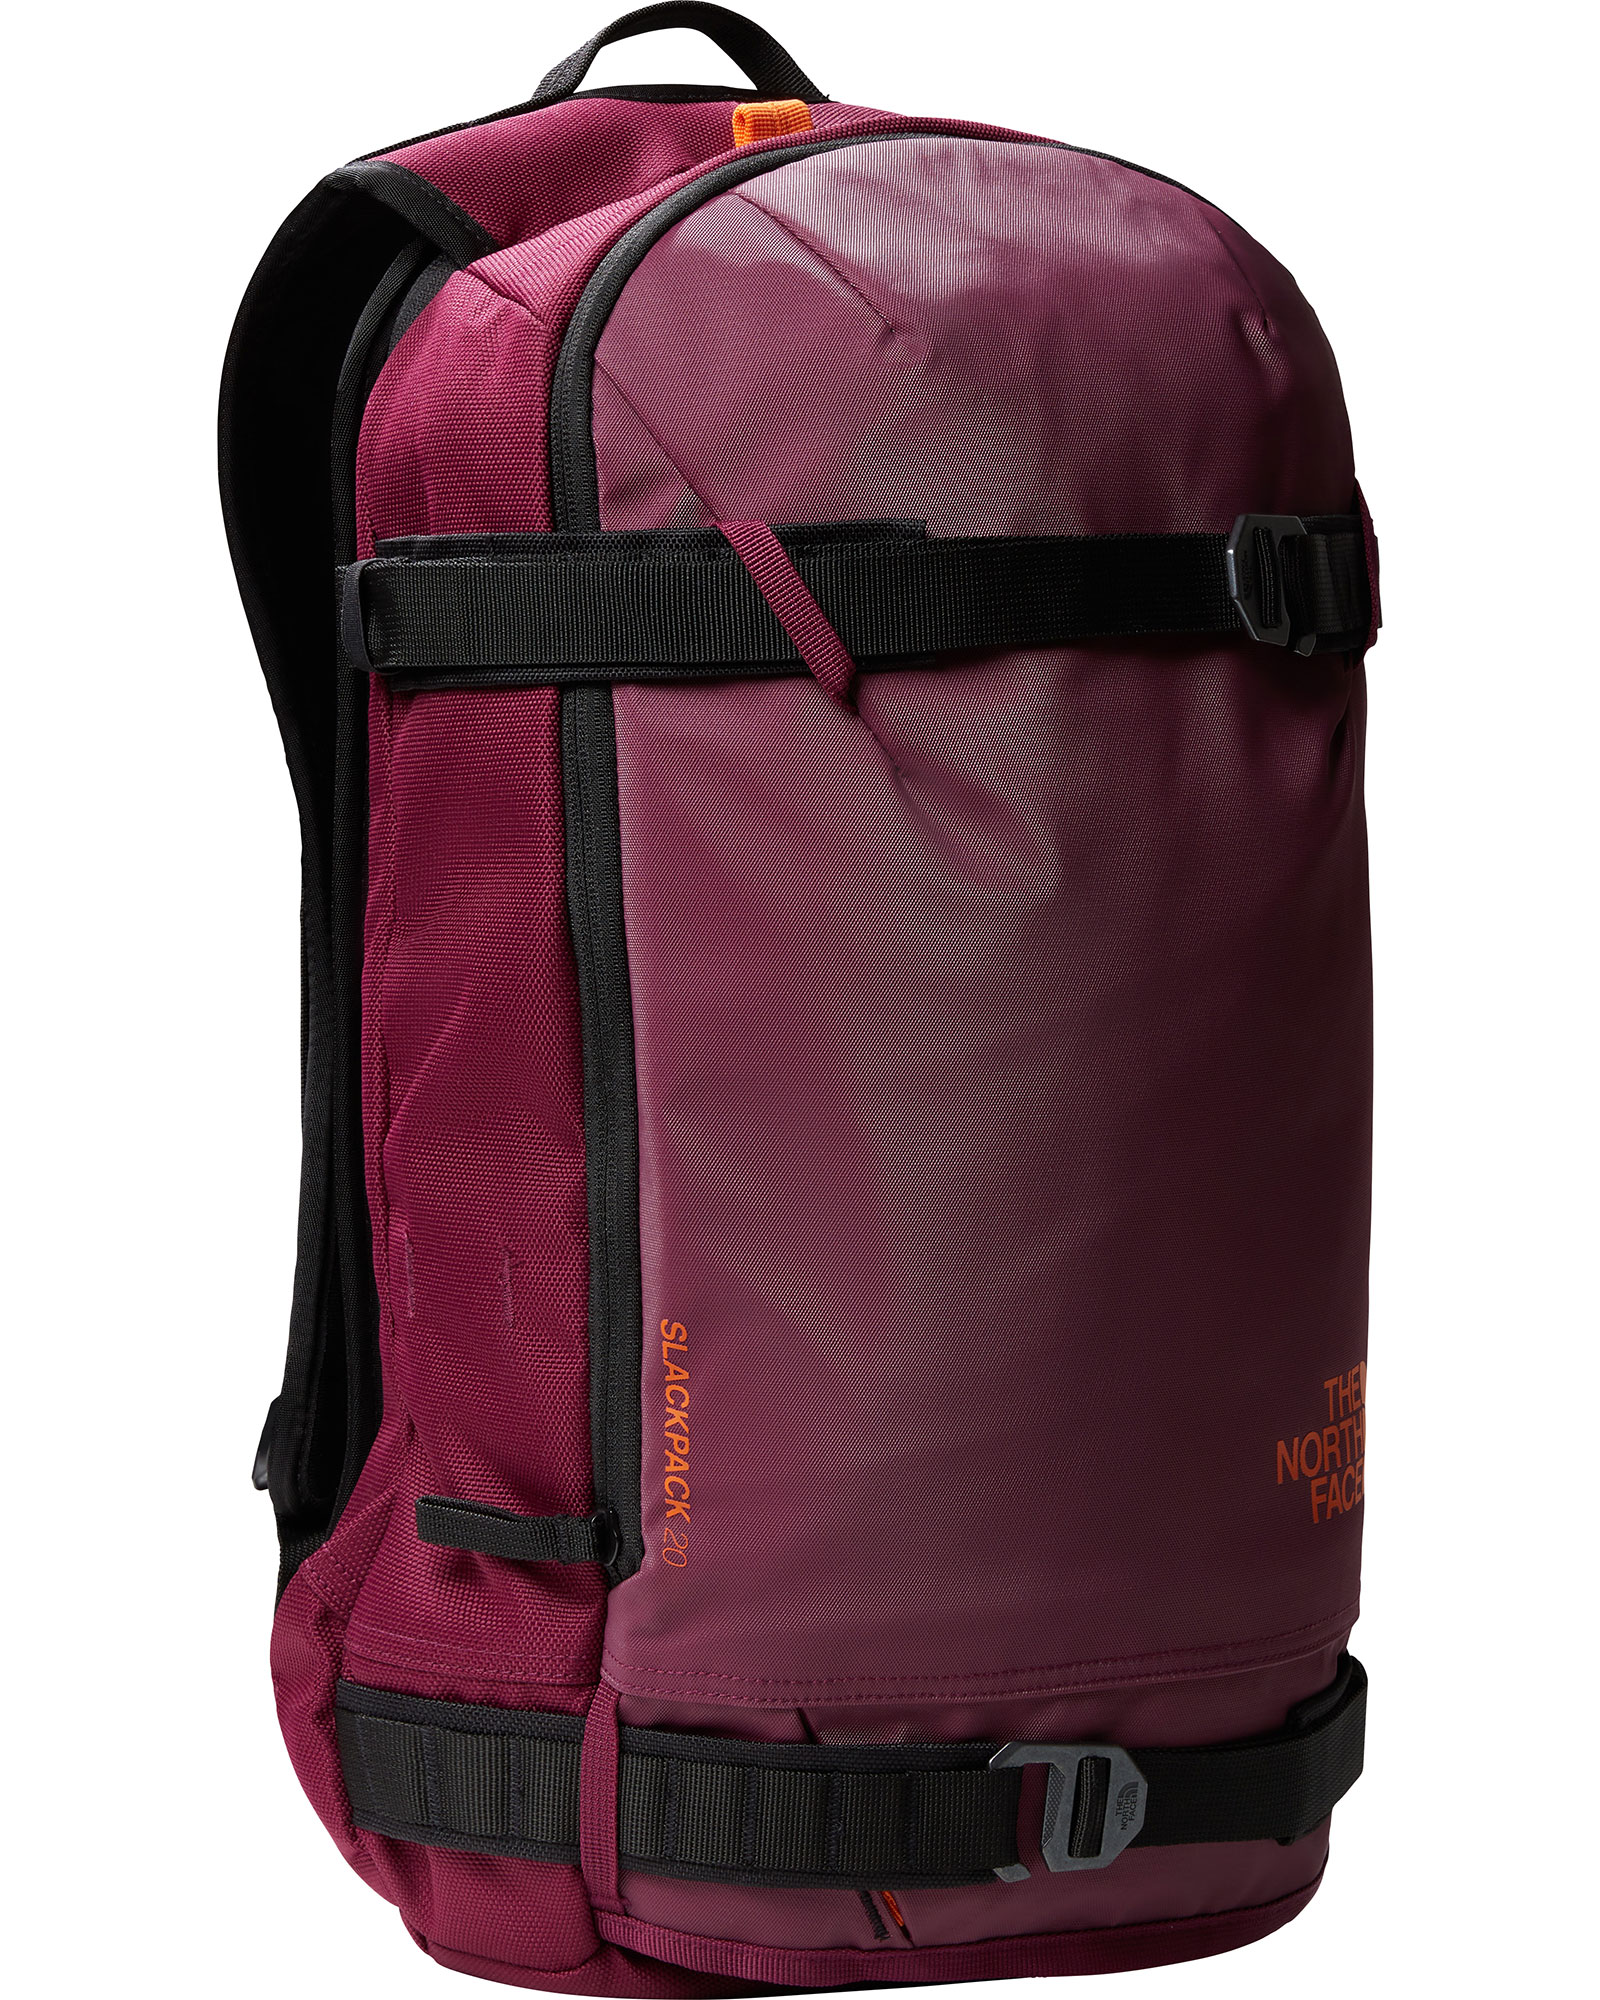 The North Face Women’s Slackpack 2.0 Expedition Backpack - Boysenberry/Mandarin